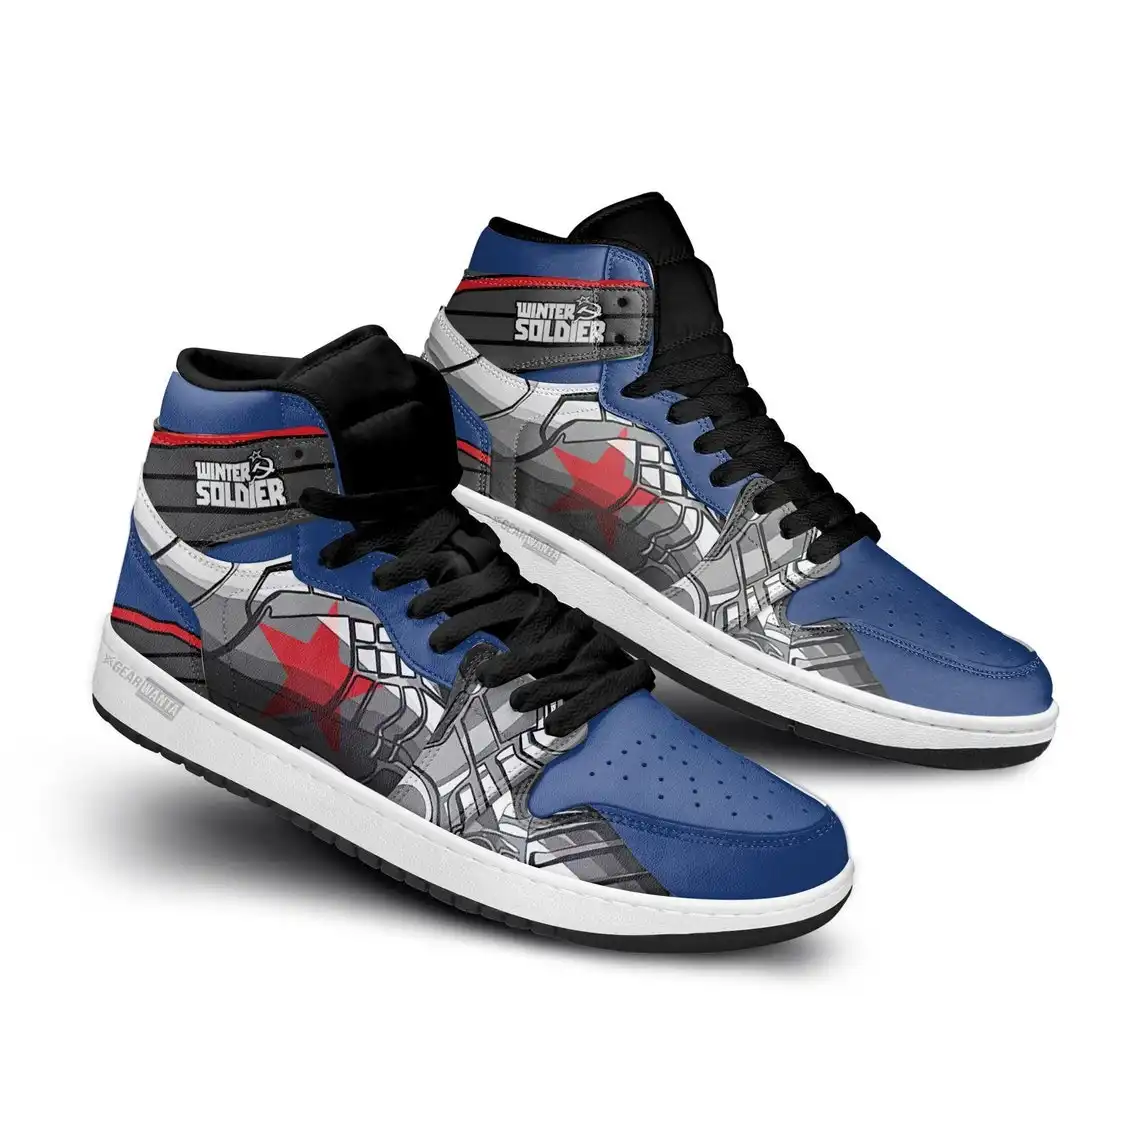 Winter Soldier Super Heroes For Movie Fans - Custom Anime Sneaker For Men And Women Air Jordan Shoes